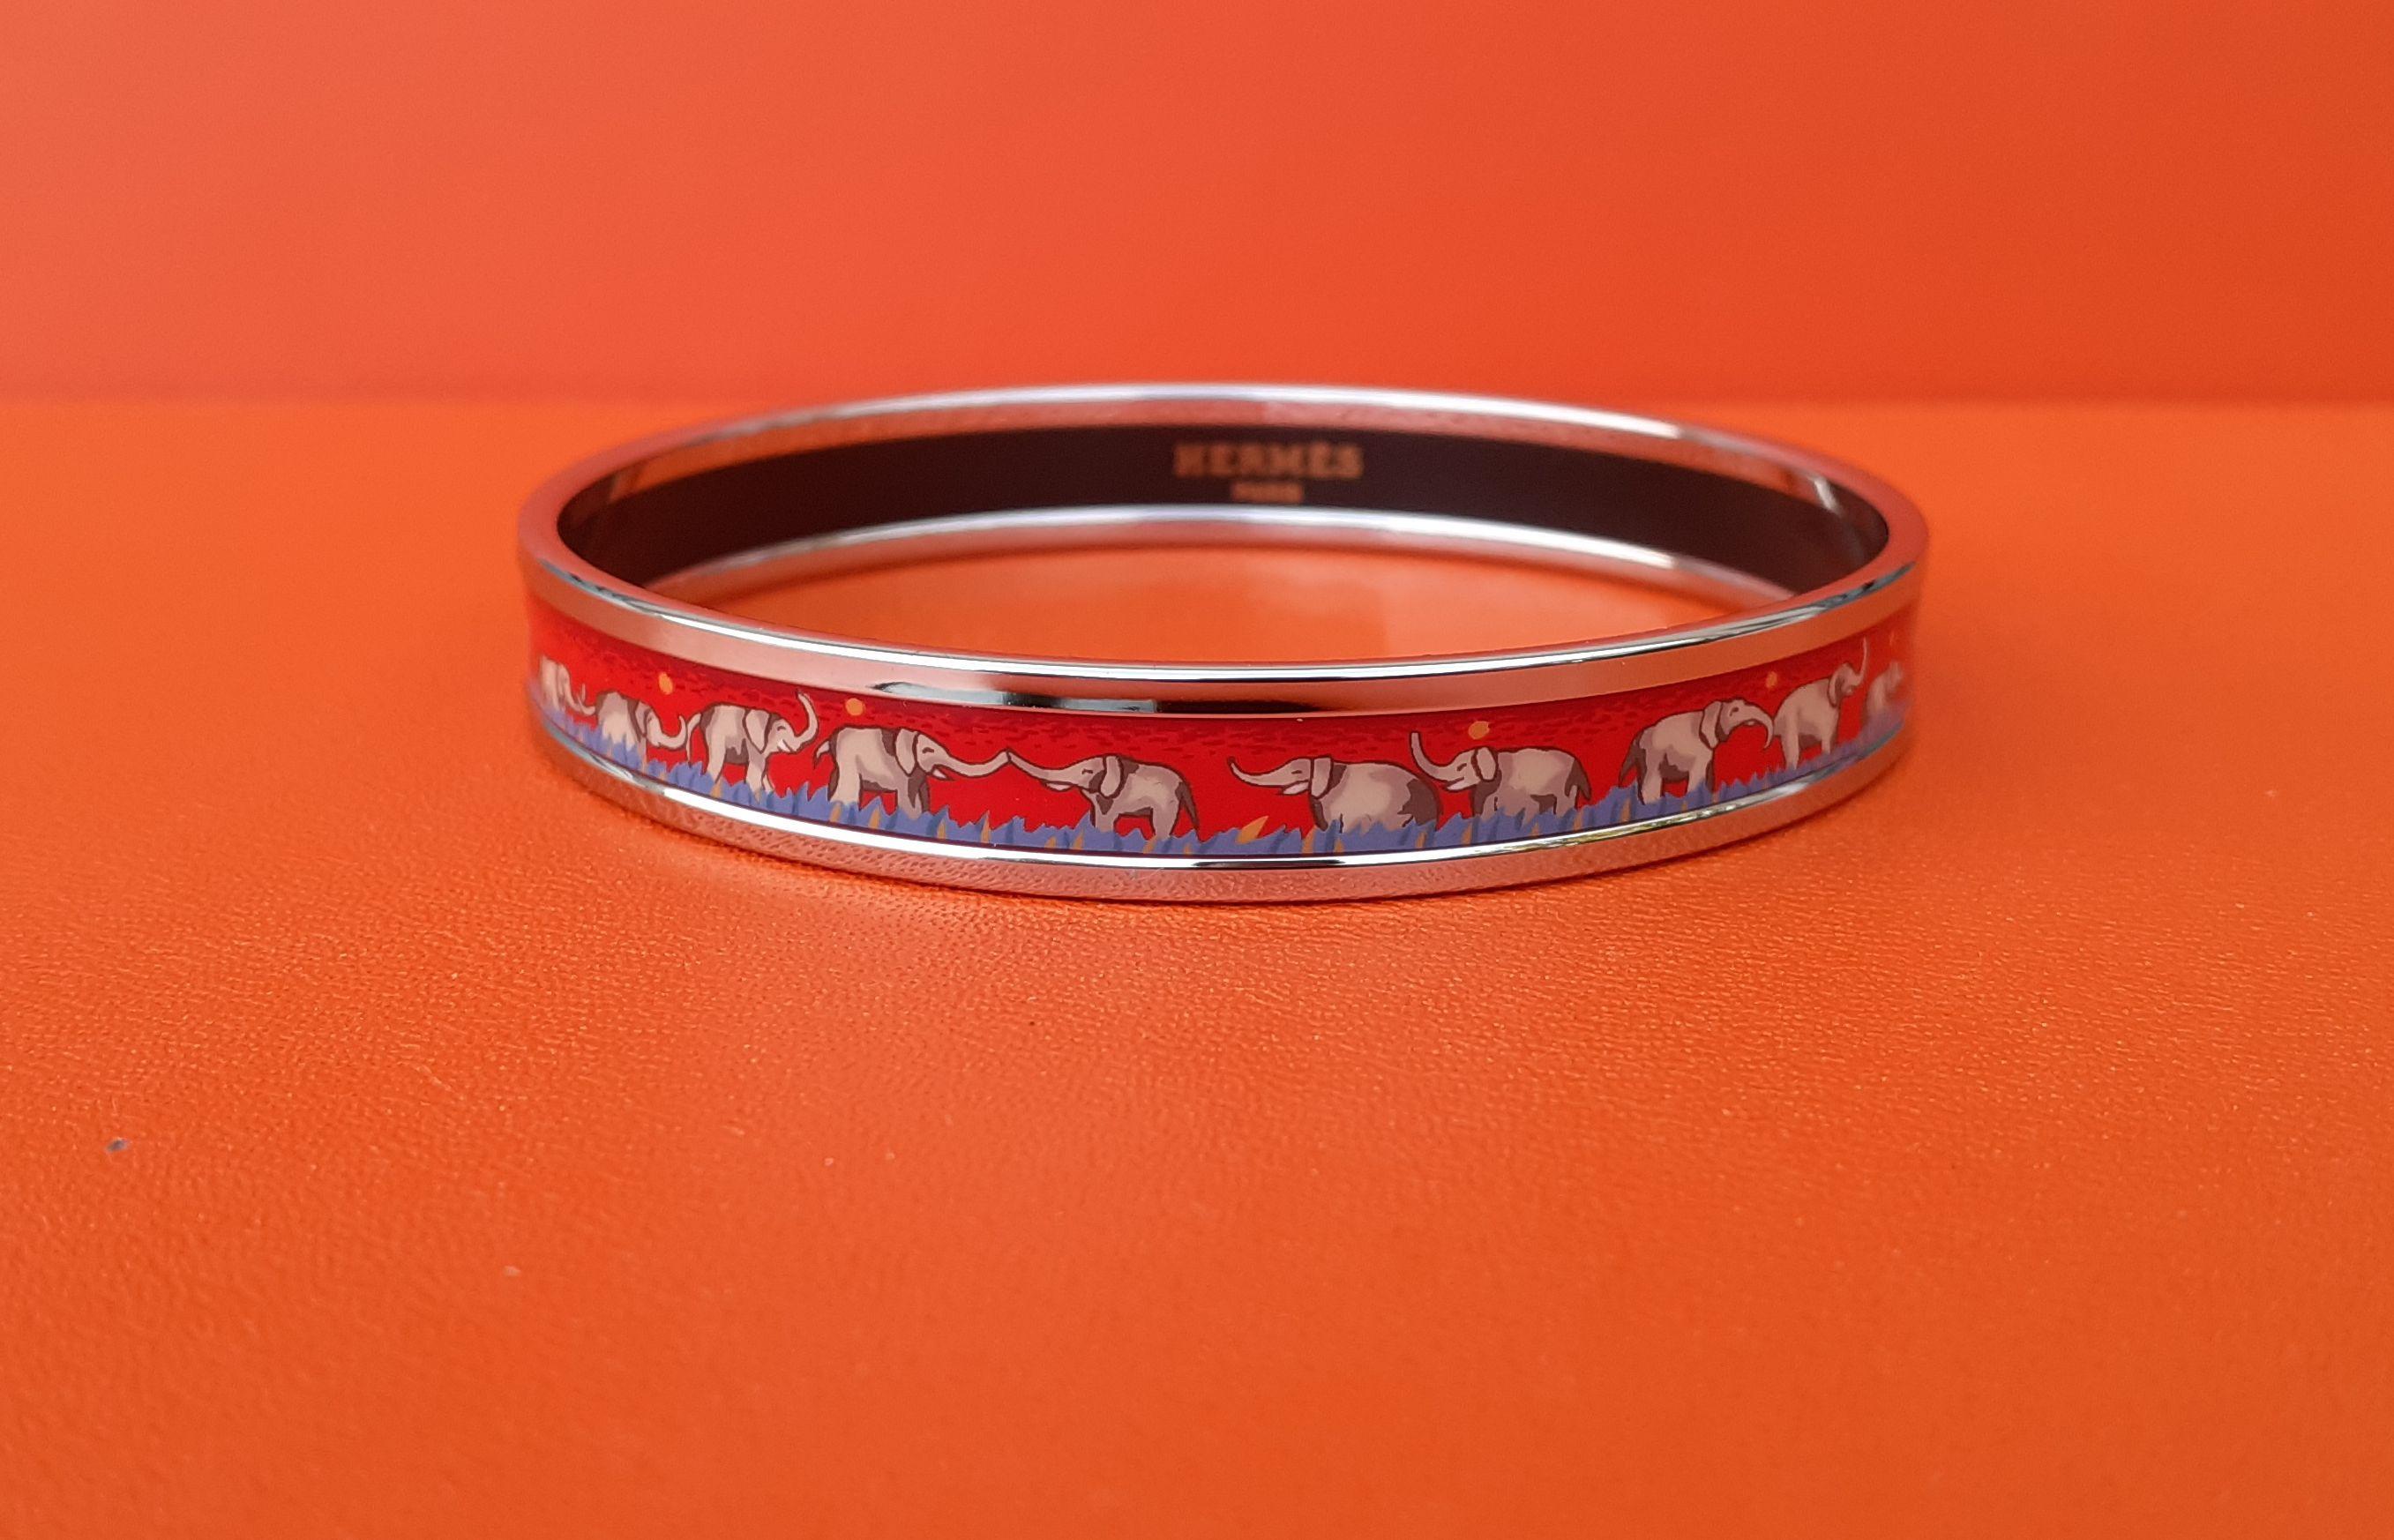 Gorgeous Authentic Hermès Bracelet

Pattern: Elephants Grazing

Hard to find ! One of the most thought after Hermès Bracelet

Made in Austria + J (2006)

Made of printed enamel and NEW palladium plated hardware (silver-tone)

Colorways: Red